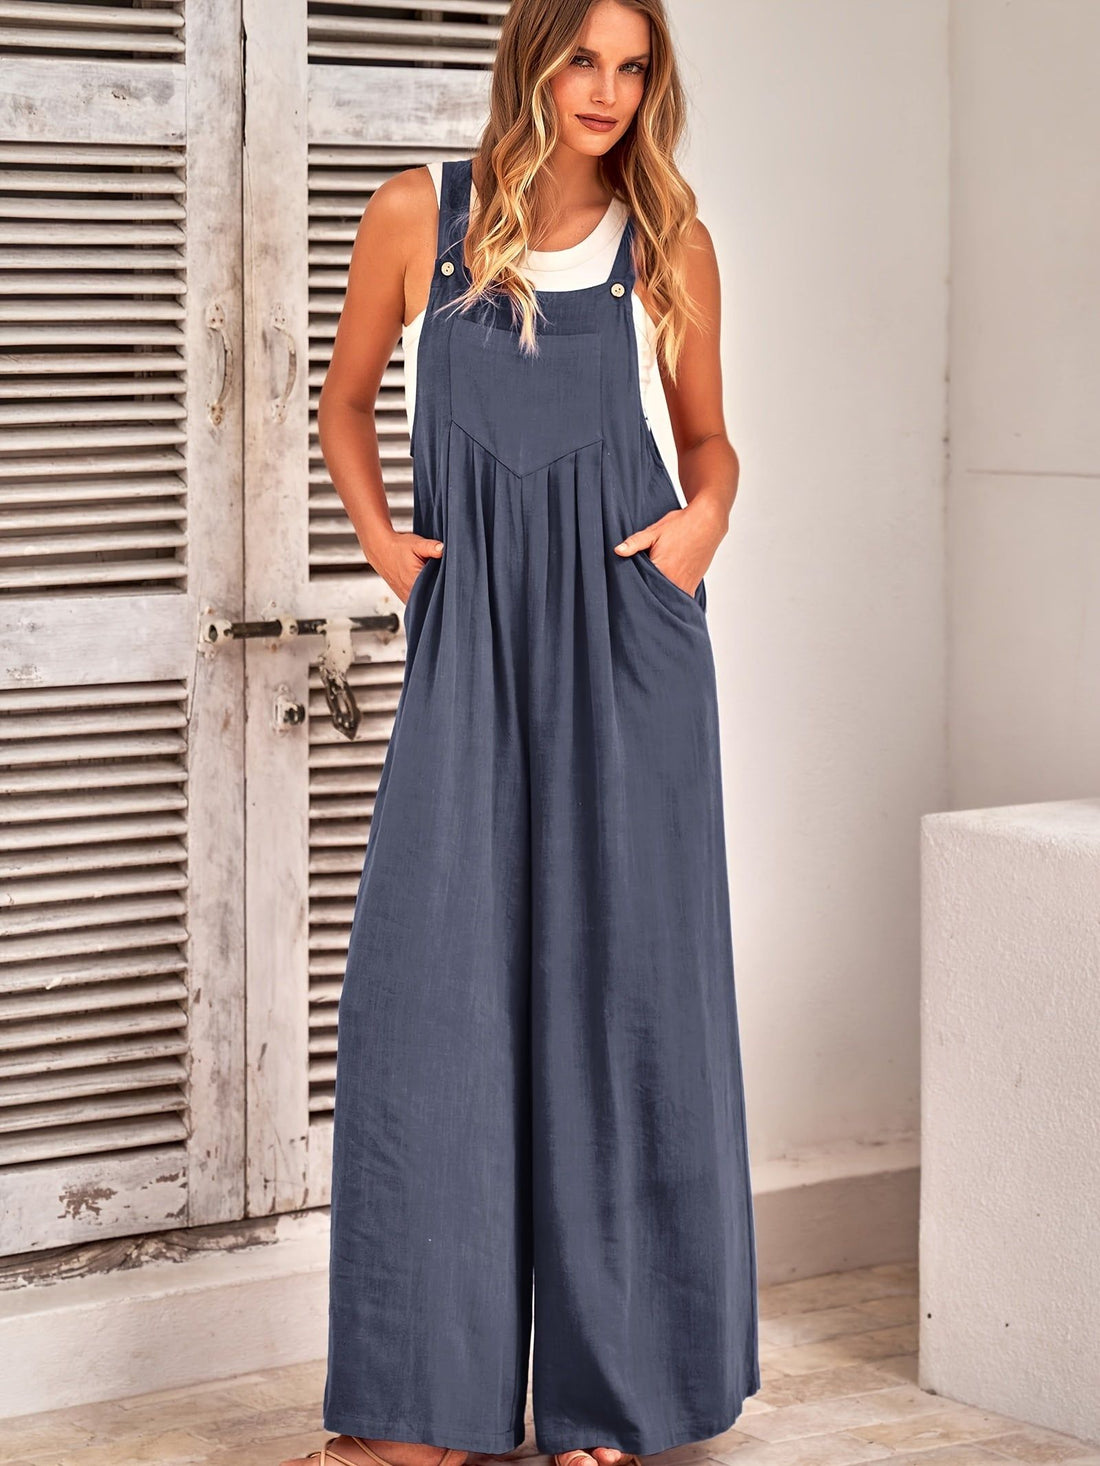 Cotton Solid Color Strappy Back Ruched Sleeveless Overall Jumpsuit with Pockets - Casual Button Decor, Comfortable and Breathable, Perfect for Spring and Summer - Womens Clothing - Fashionqueene.com